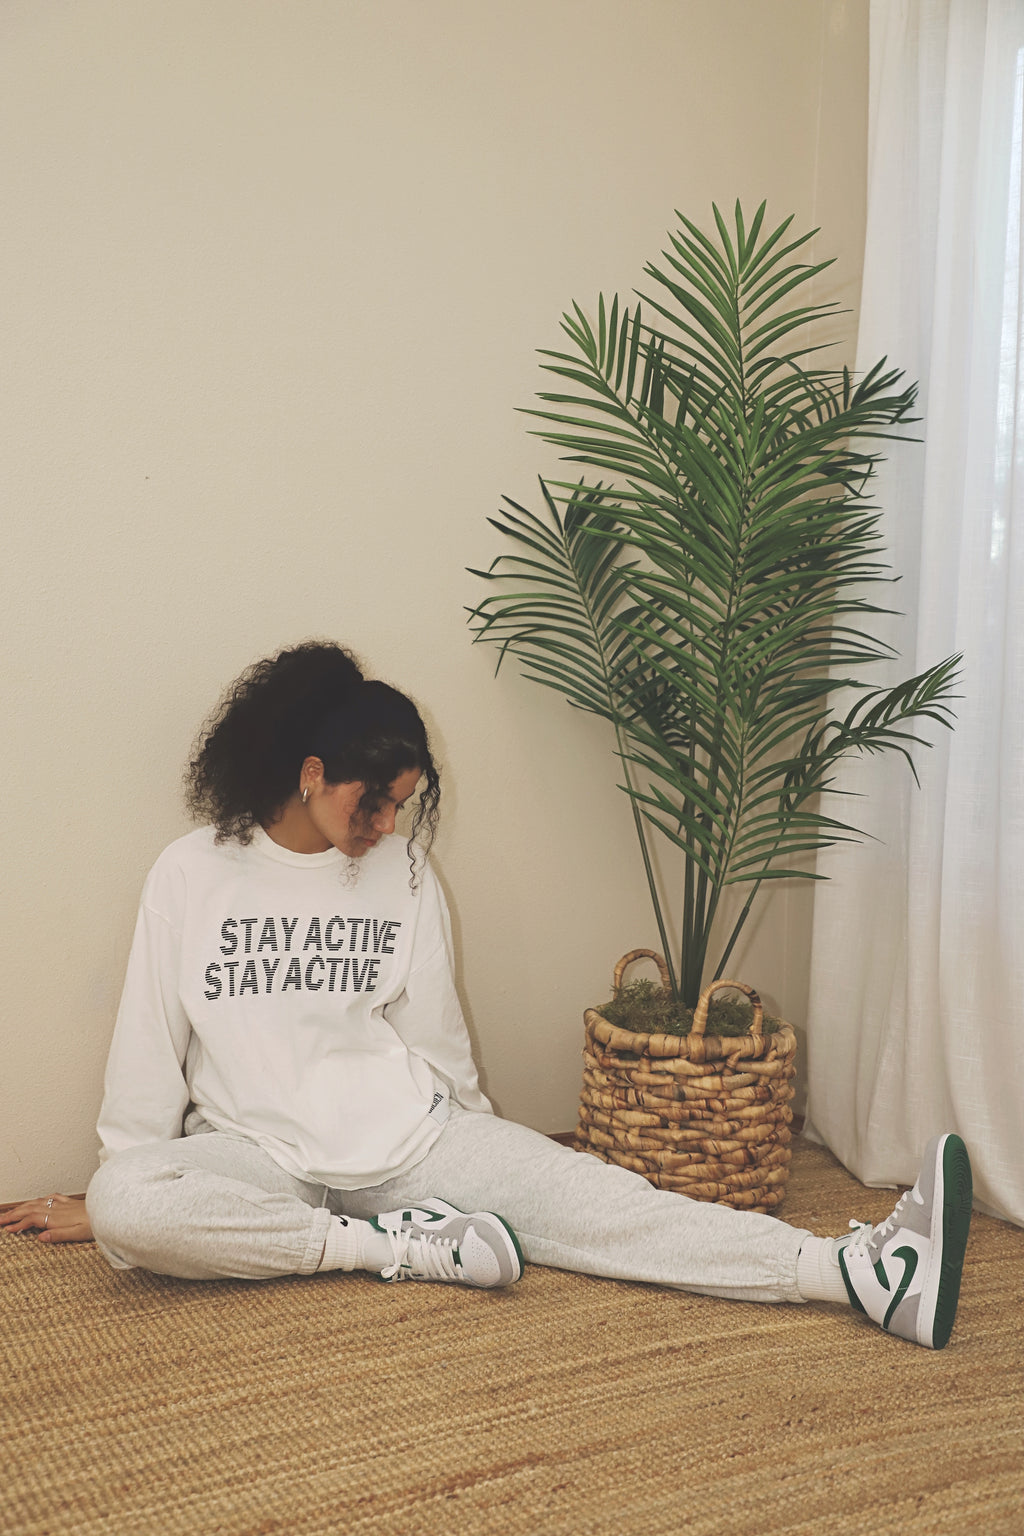 STAY ACTIVE ACTIVE SHIRT